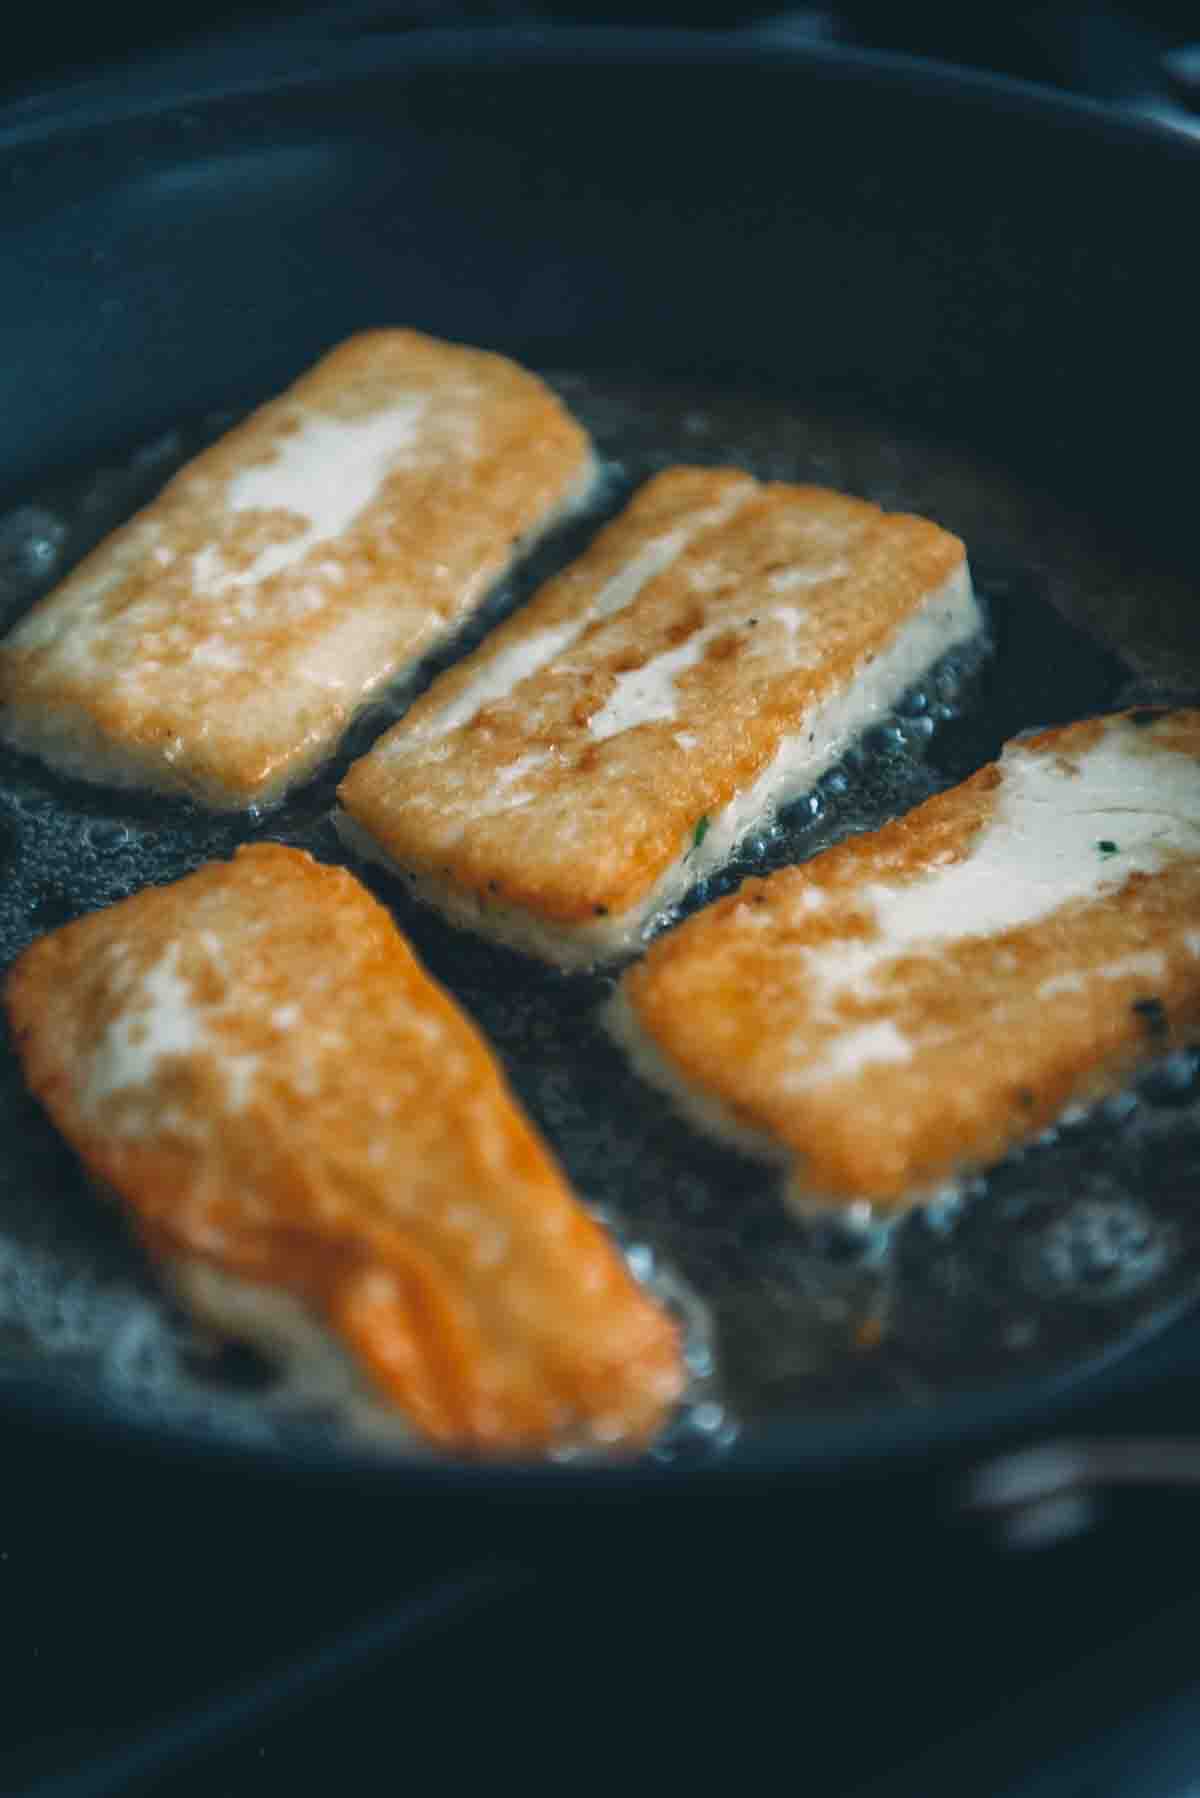 Fried cheese in a pan.